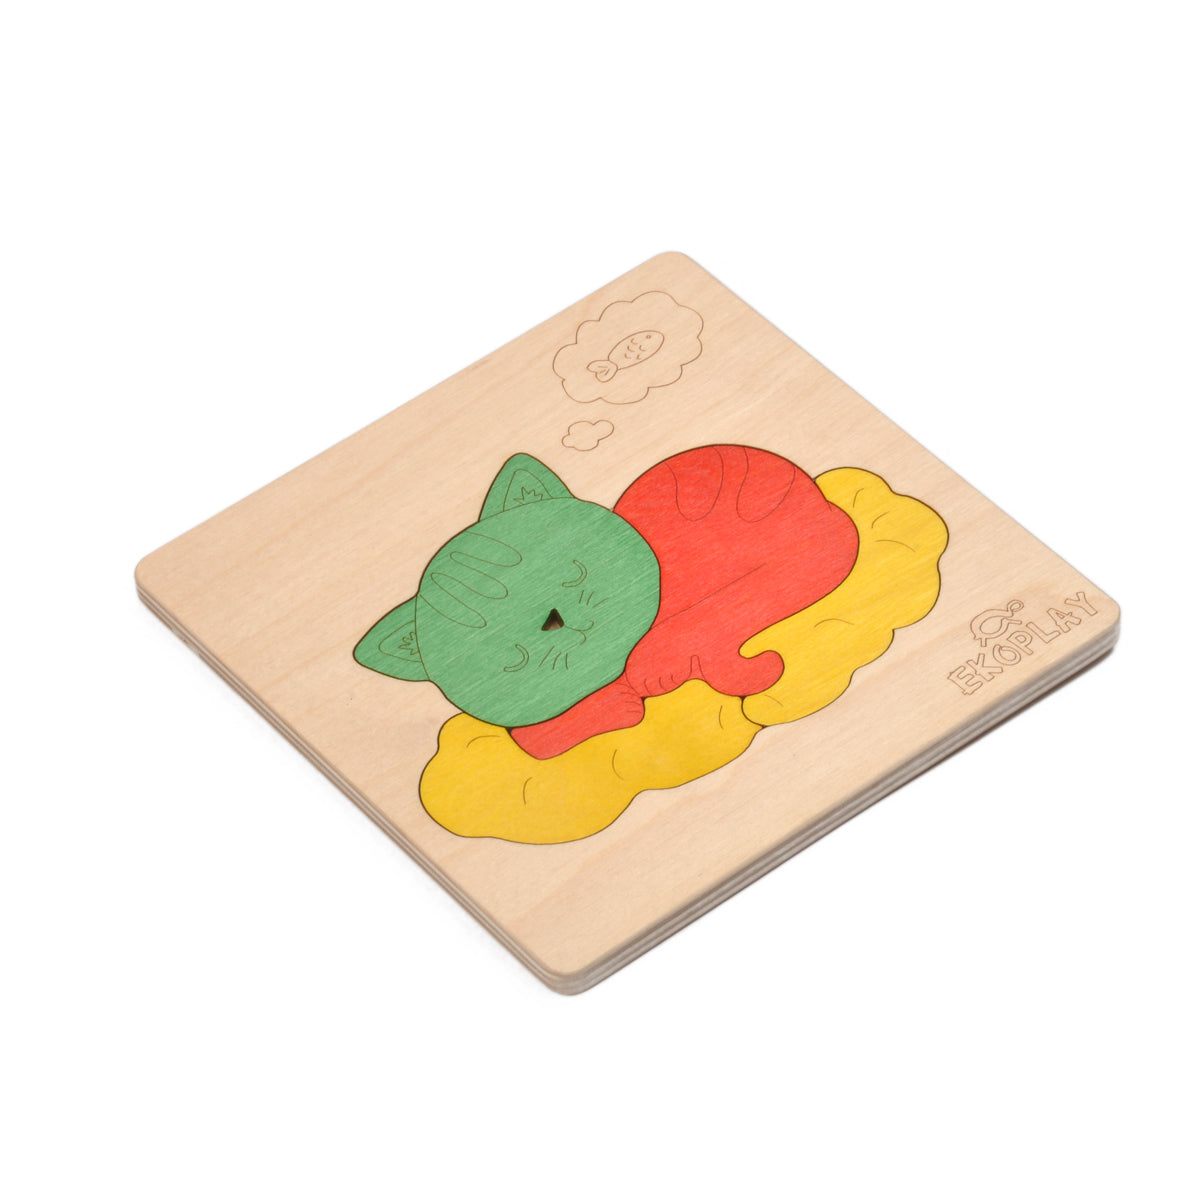 Wooden Cat On a Mat Puzzle Board